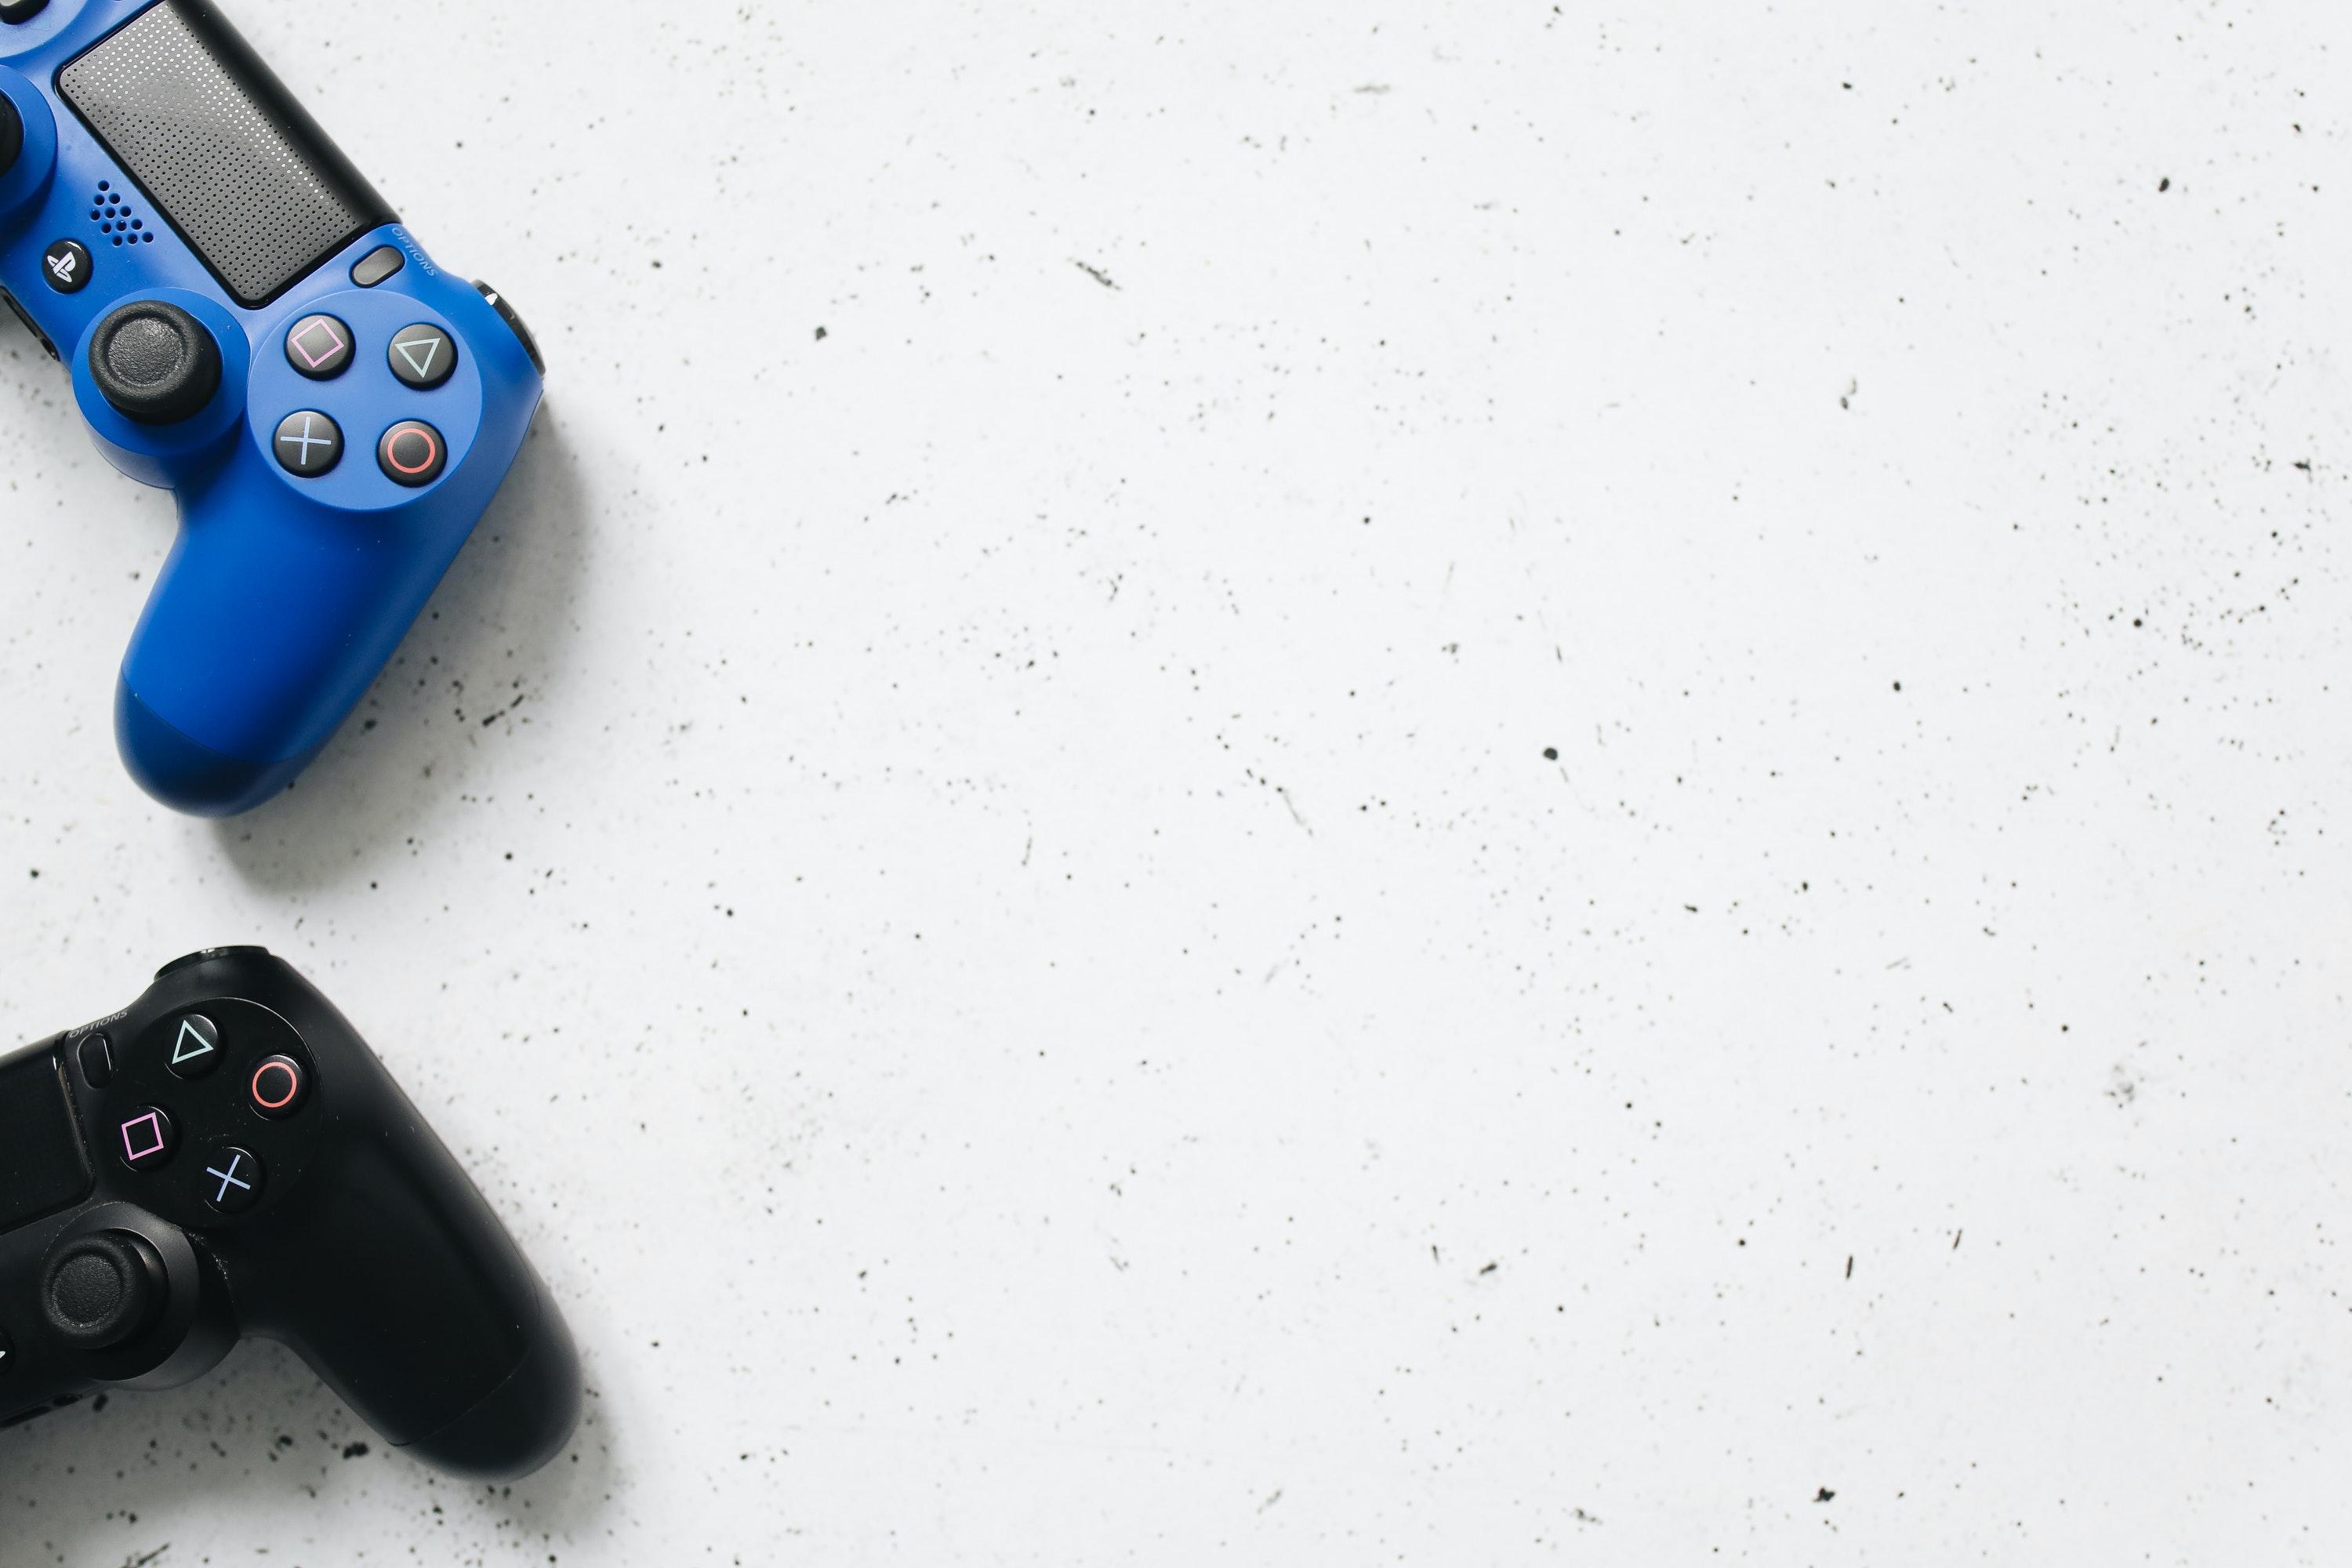  How To Build A Ps4 Controller 